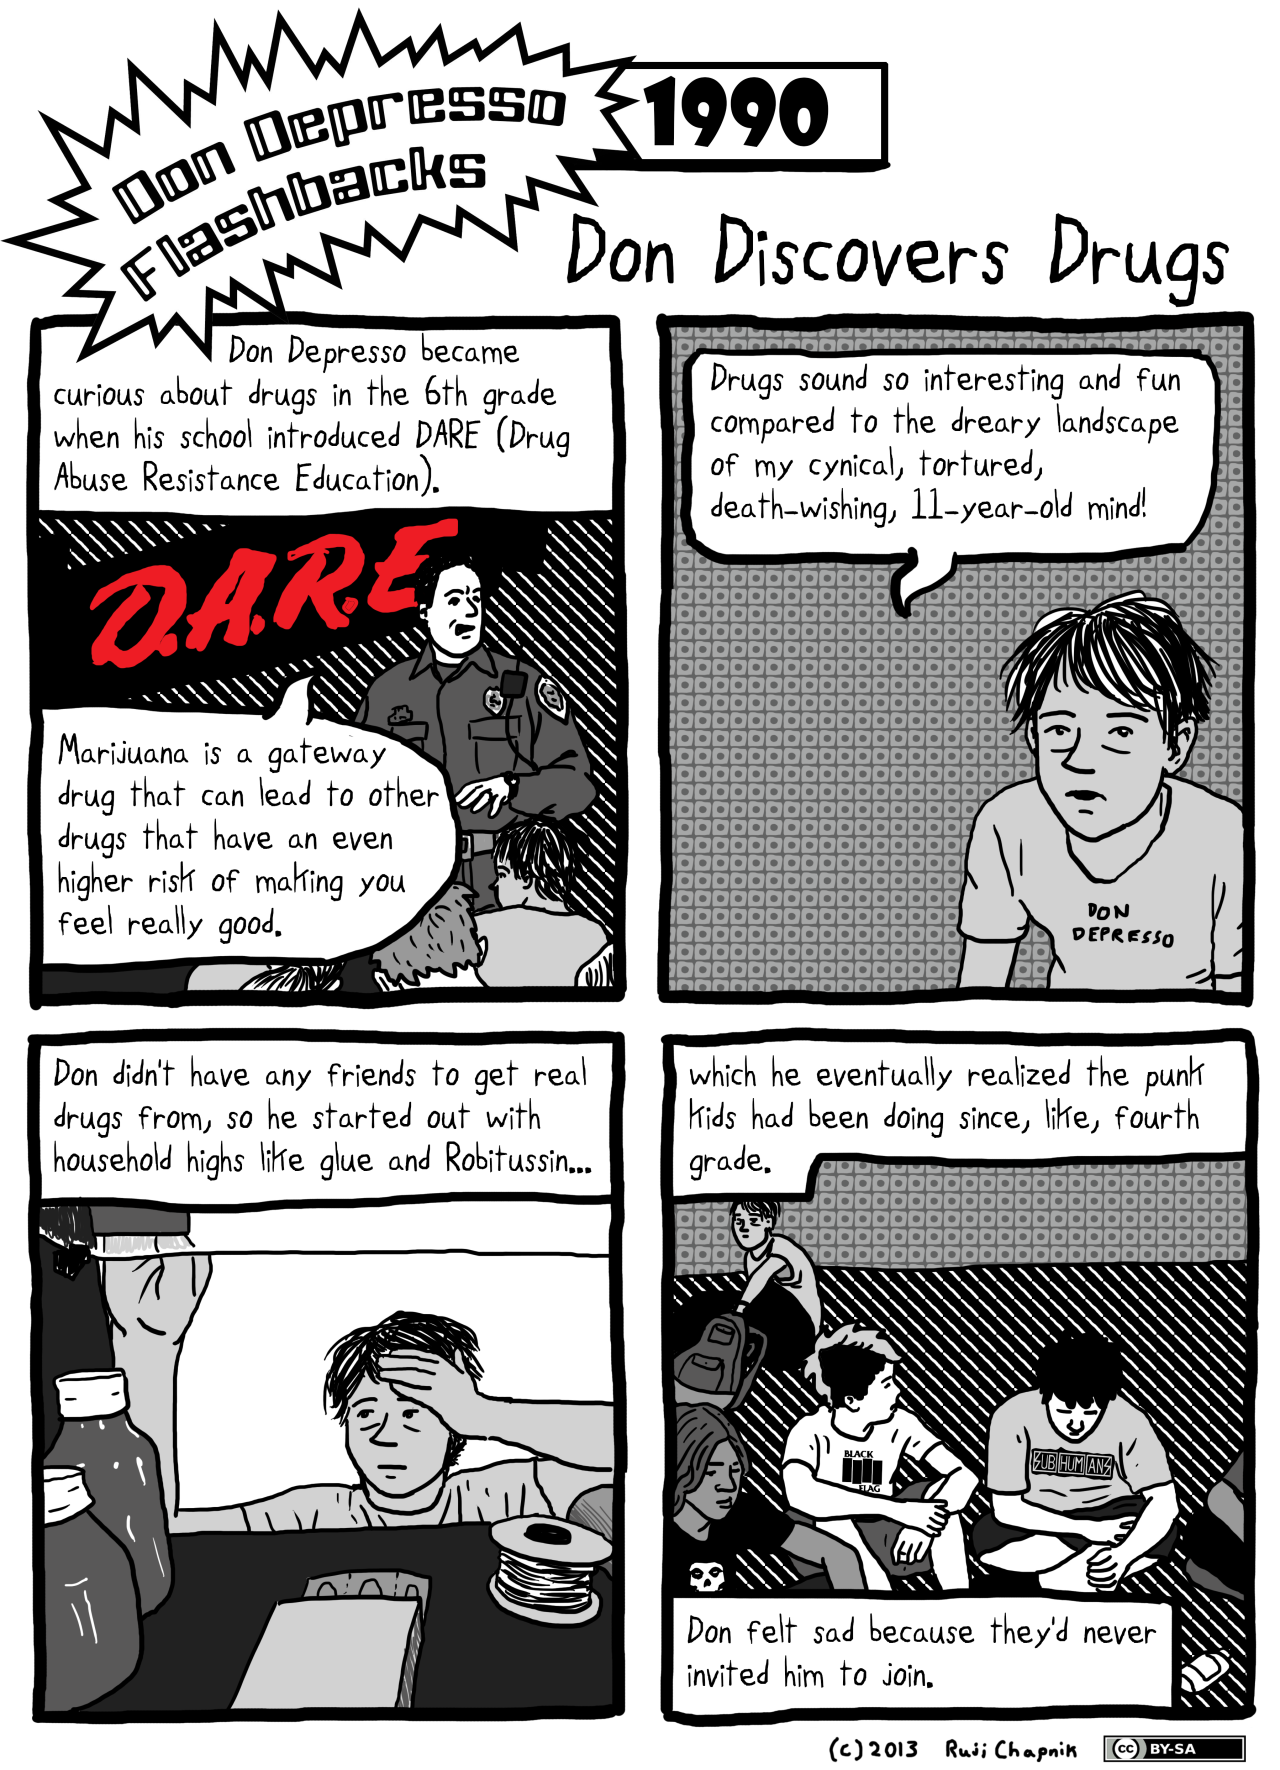 dondepresso:
“#550: Don Depresso Flashbacks (1990): Don Discovers Drugs
”
Happy 4:20 PM on 4/20/2018! Here’s a rerun about Don Depresso’s childhood that I queued up earlier.
WARNING: This is satire! Depresso Publishing DOES NOT recommend sniffing...